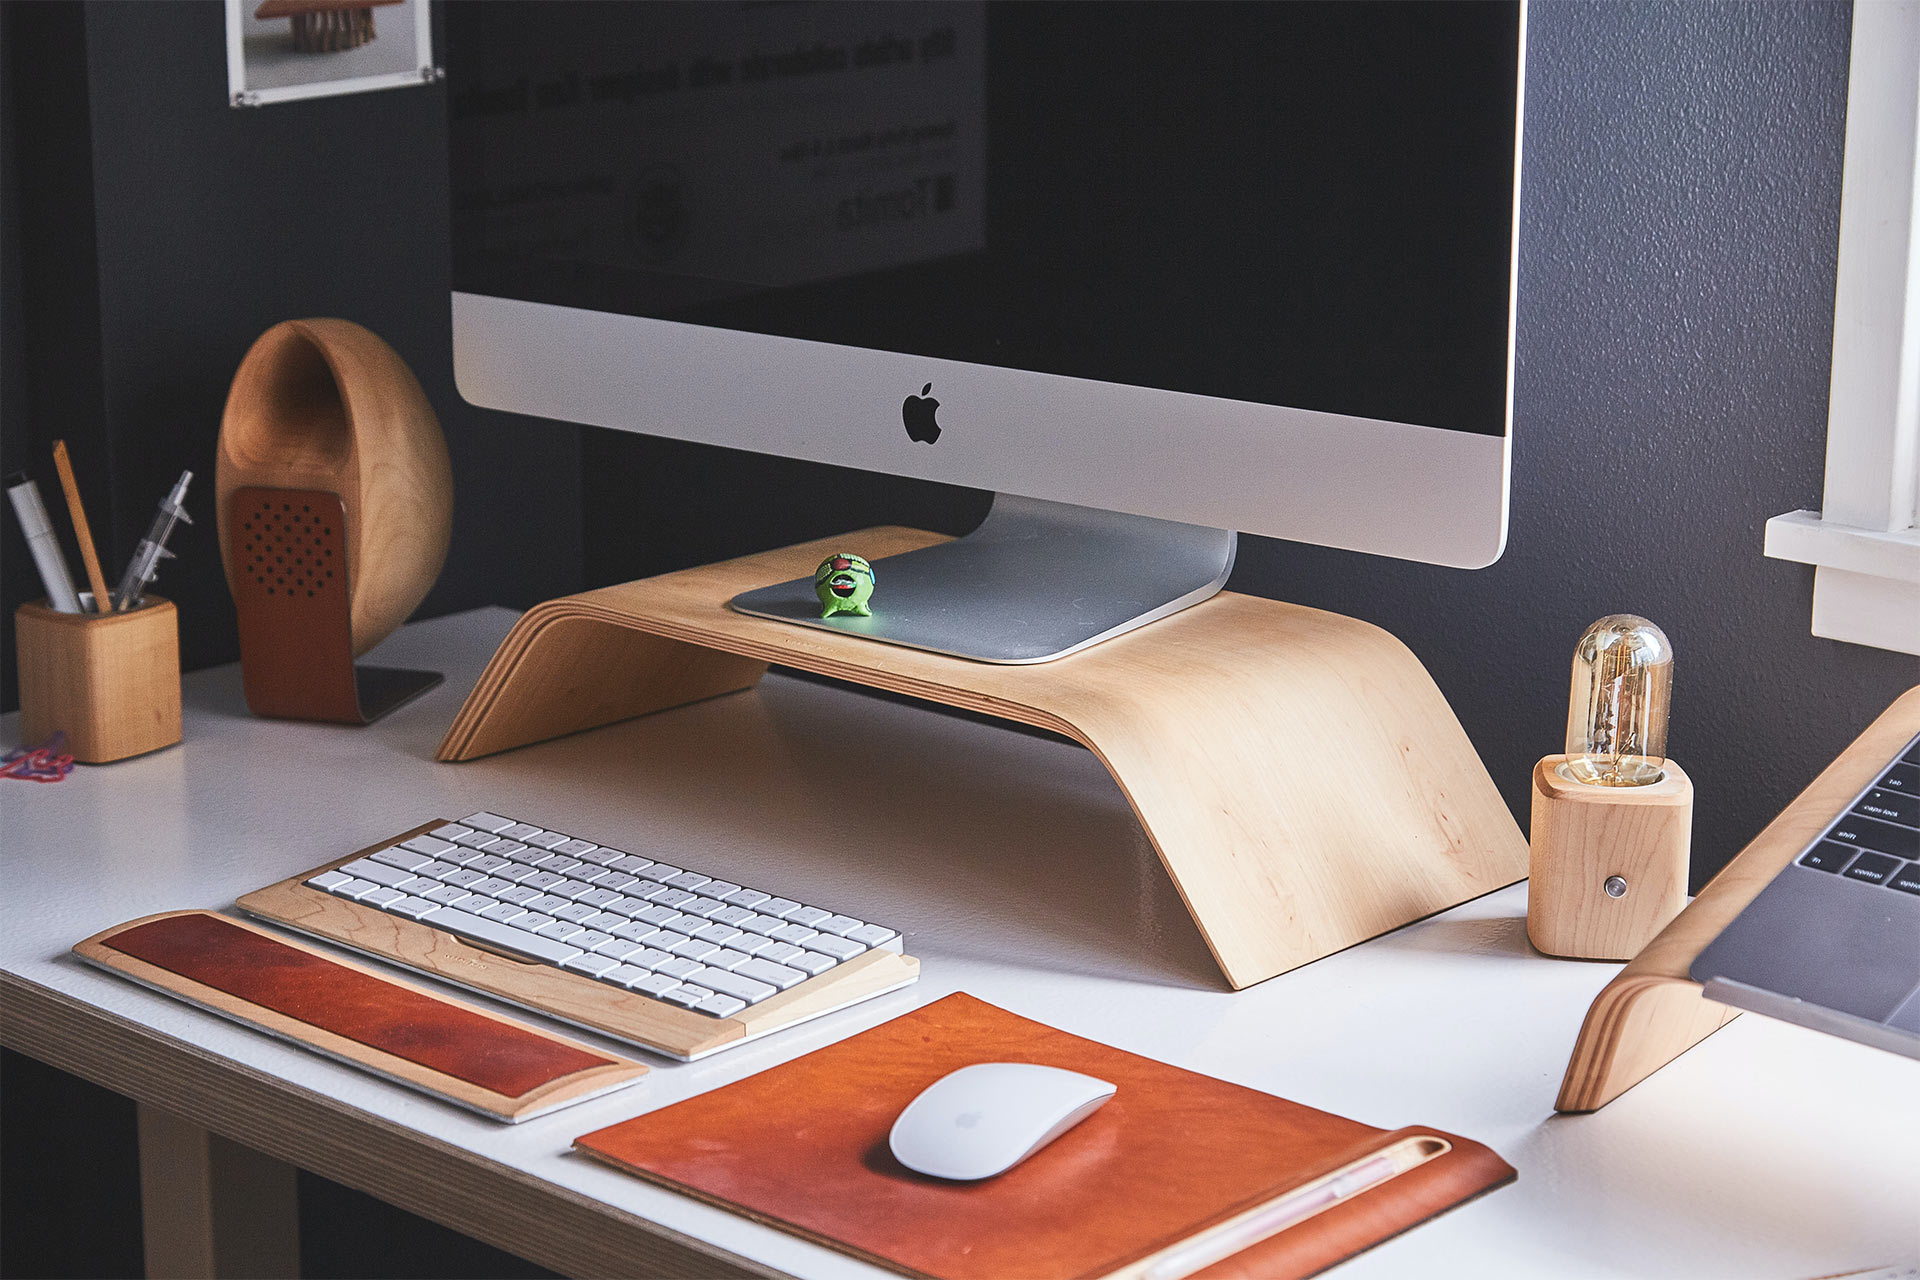 An iMac on a wooden stand on a desk with wireless keyboard and mouse.